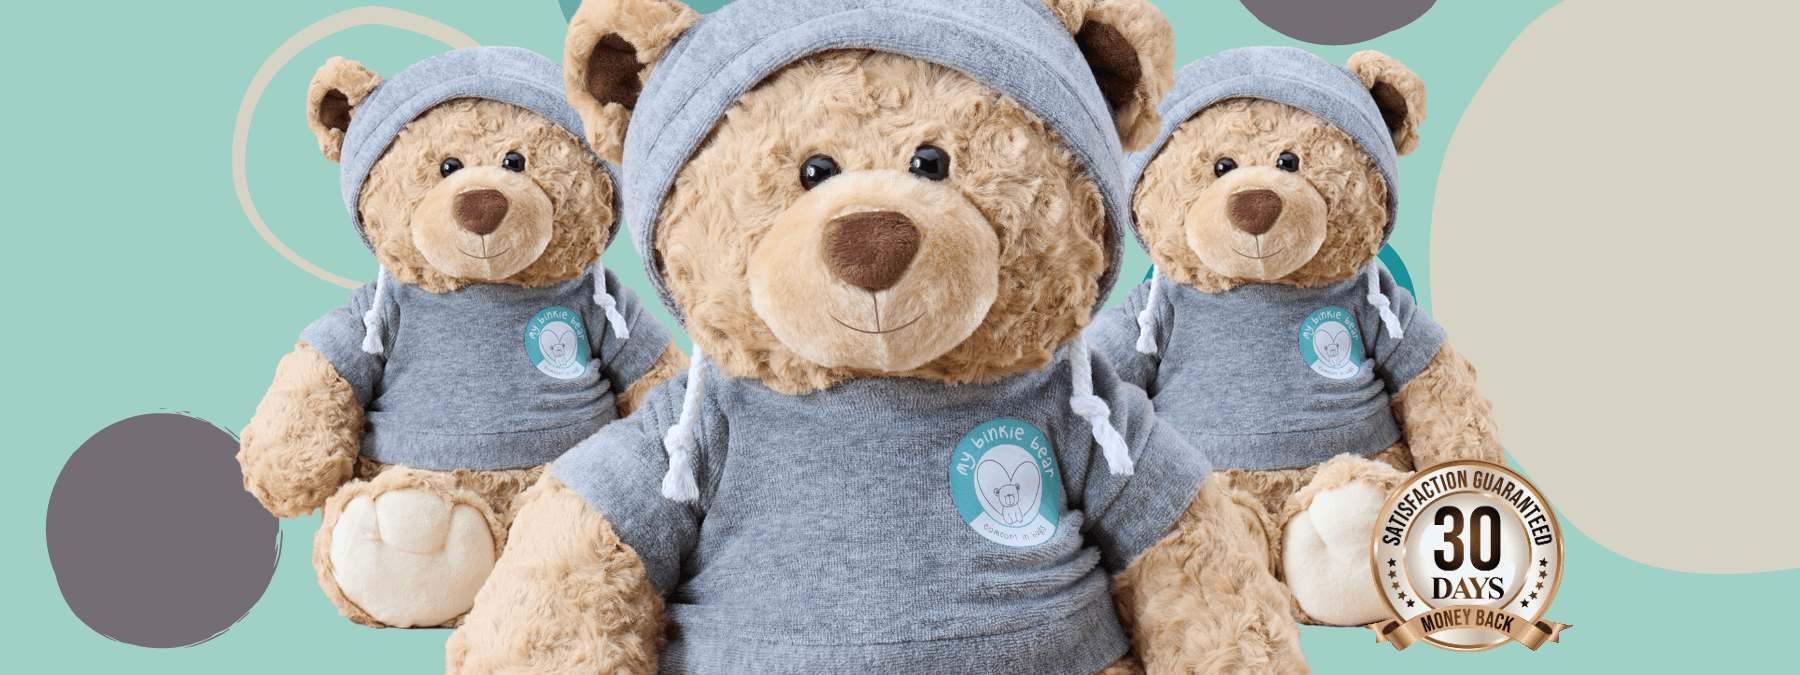 My Binkie Bear - Paci Weaning Solution Products